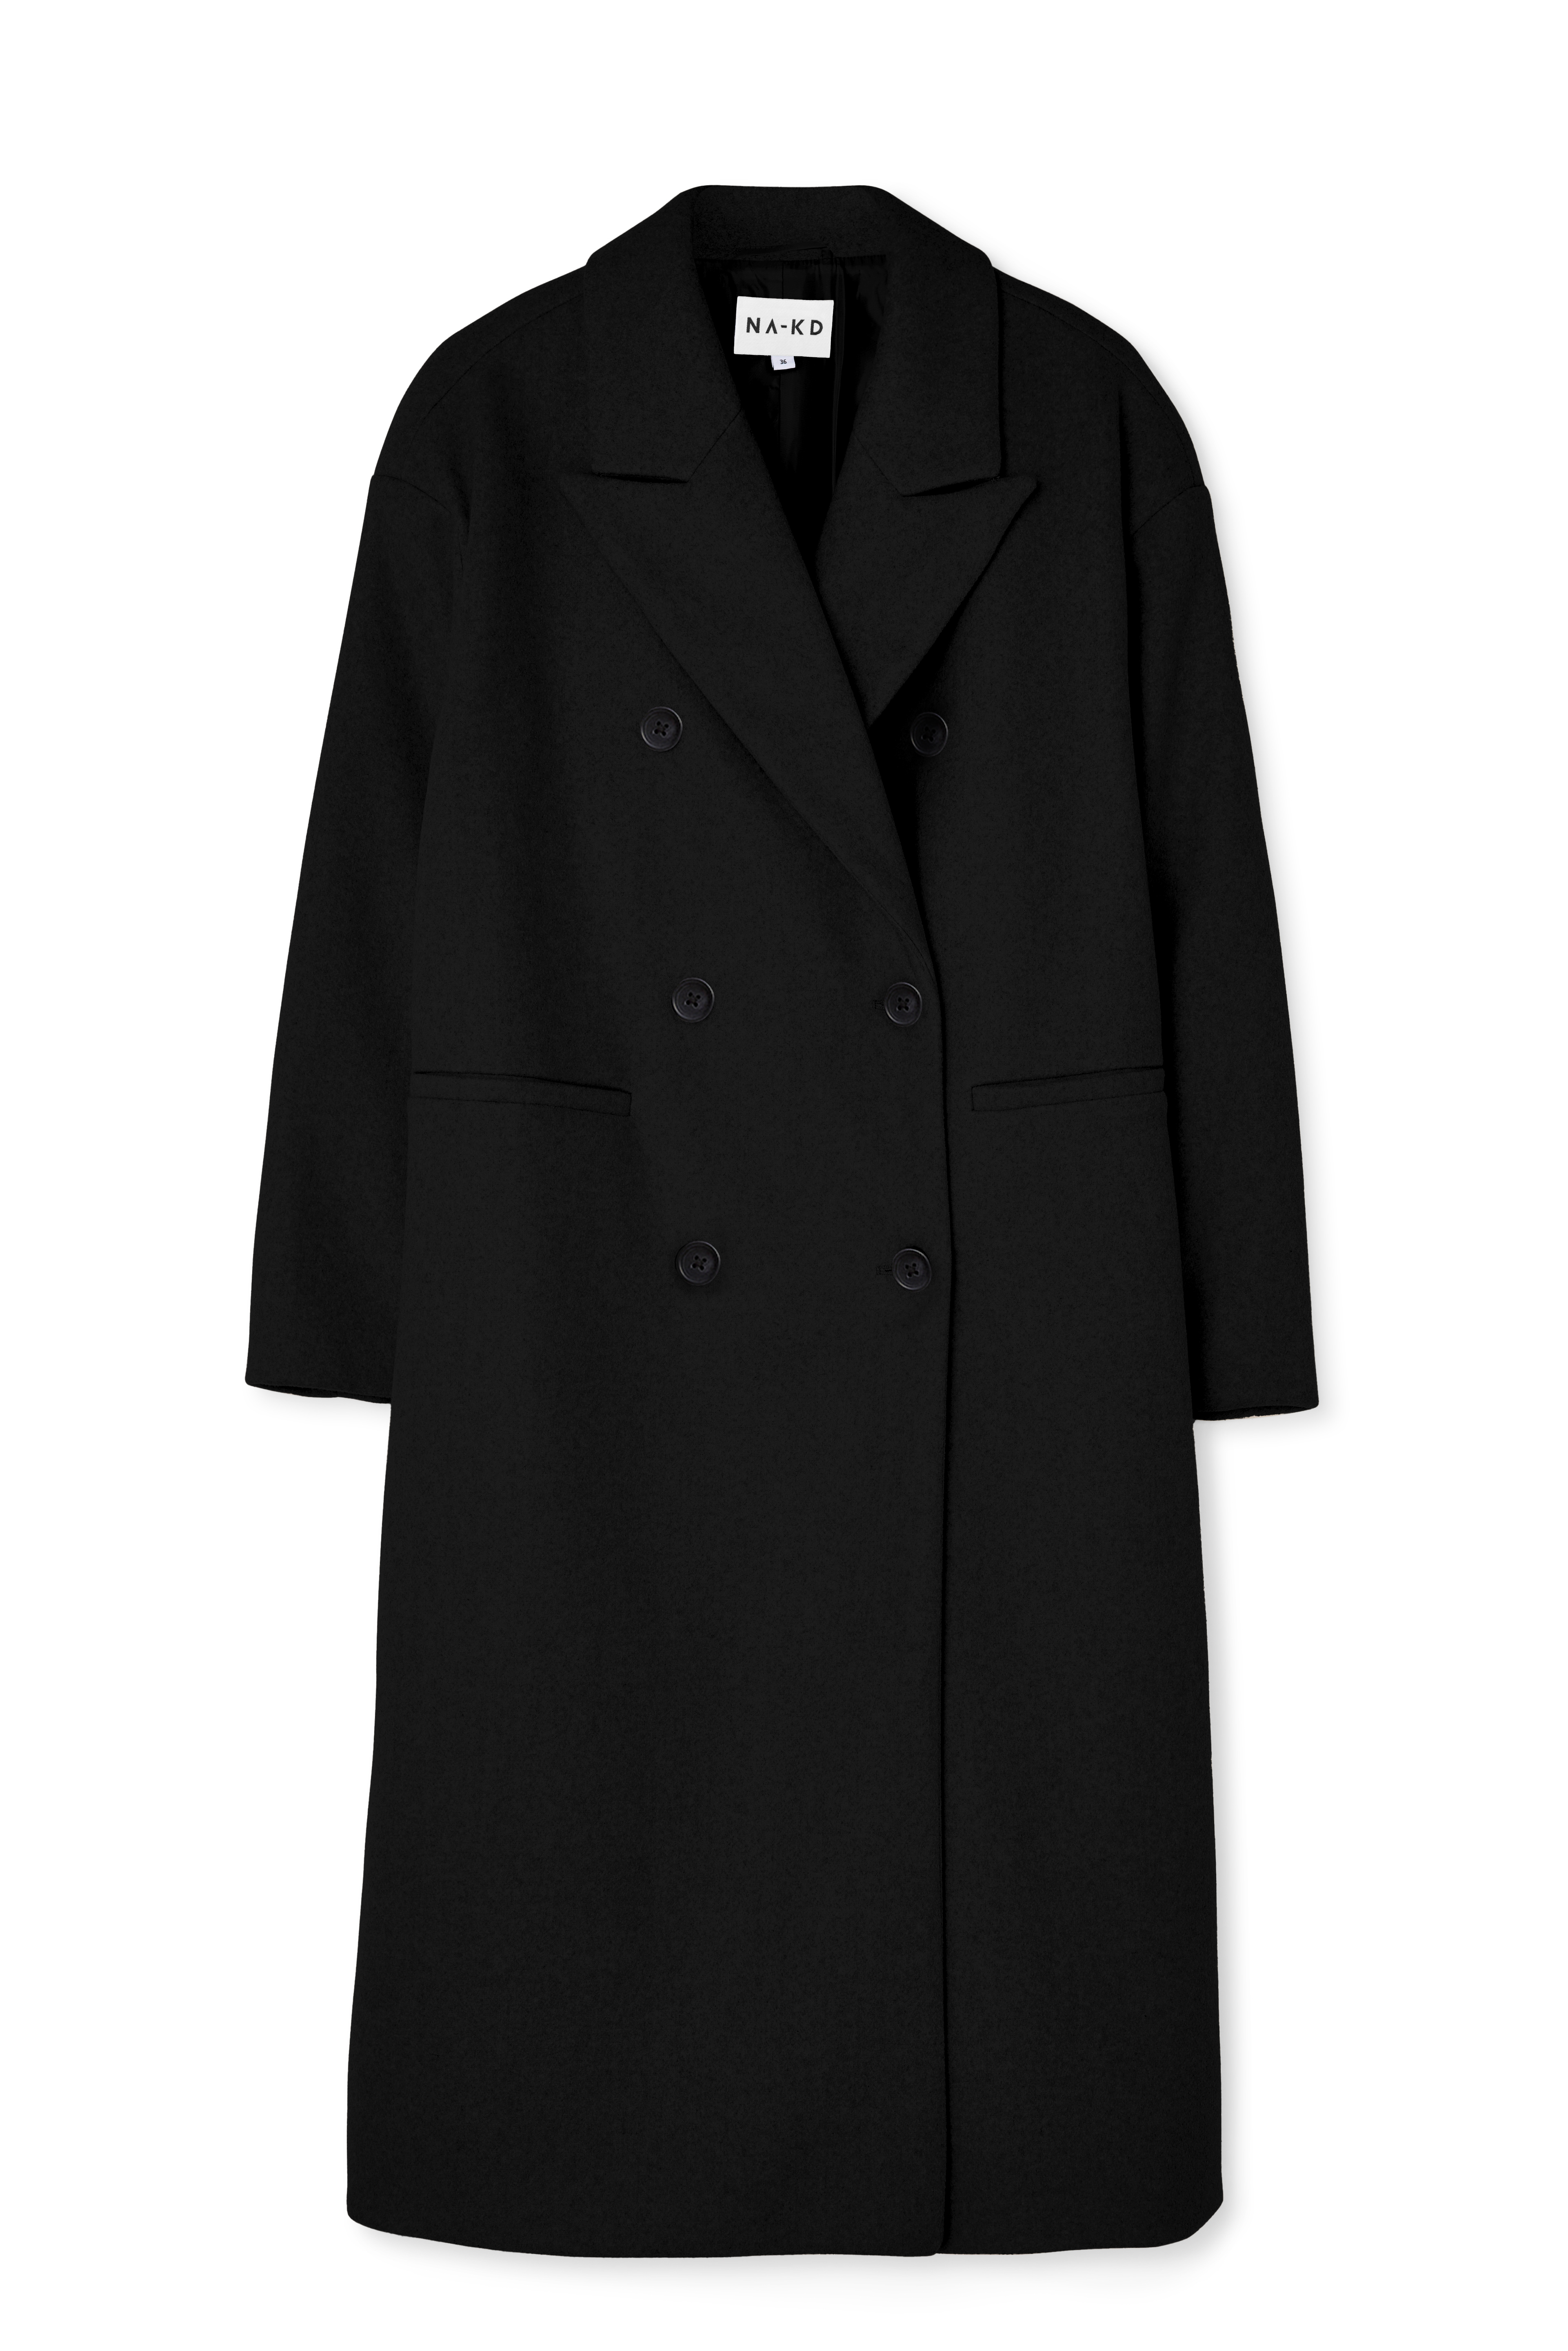 Na-kd Double Breasted Short Coat In Black | ModeSens